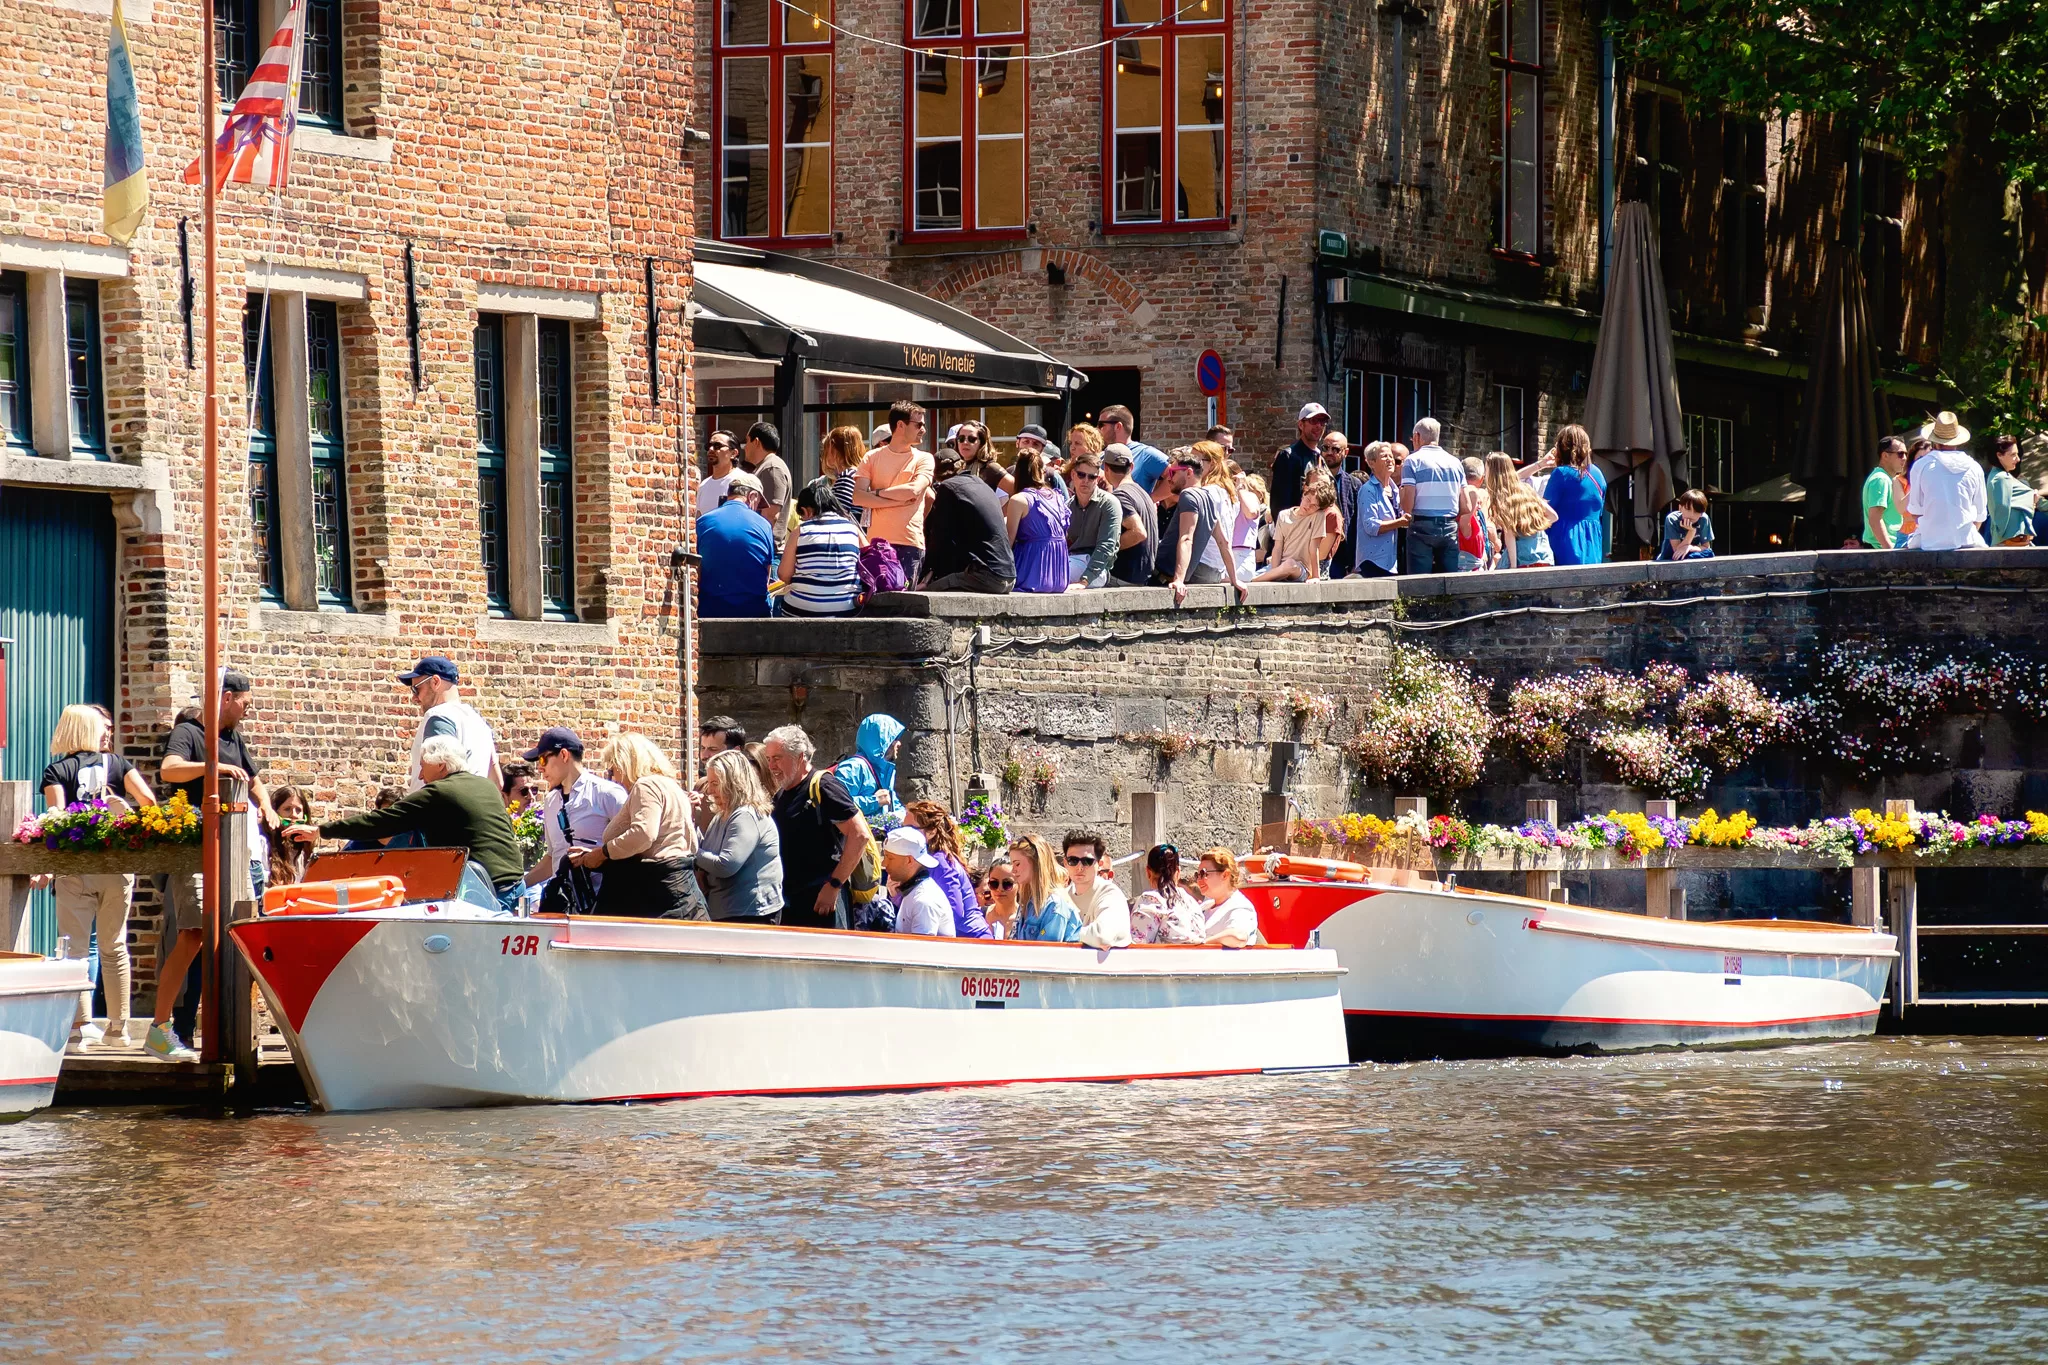 People lined up for a canal tour in Bruges.  The boat is white with red trim.